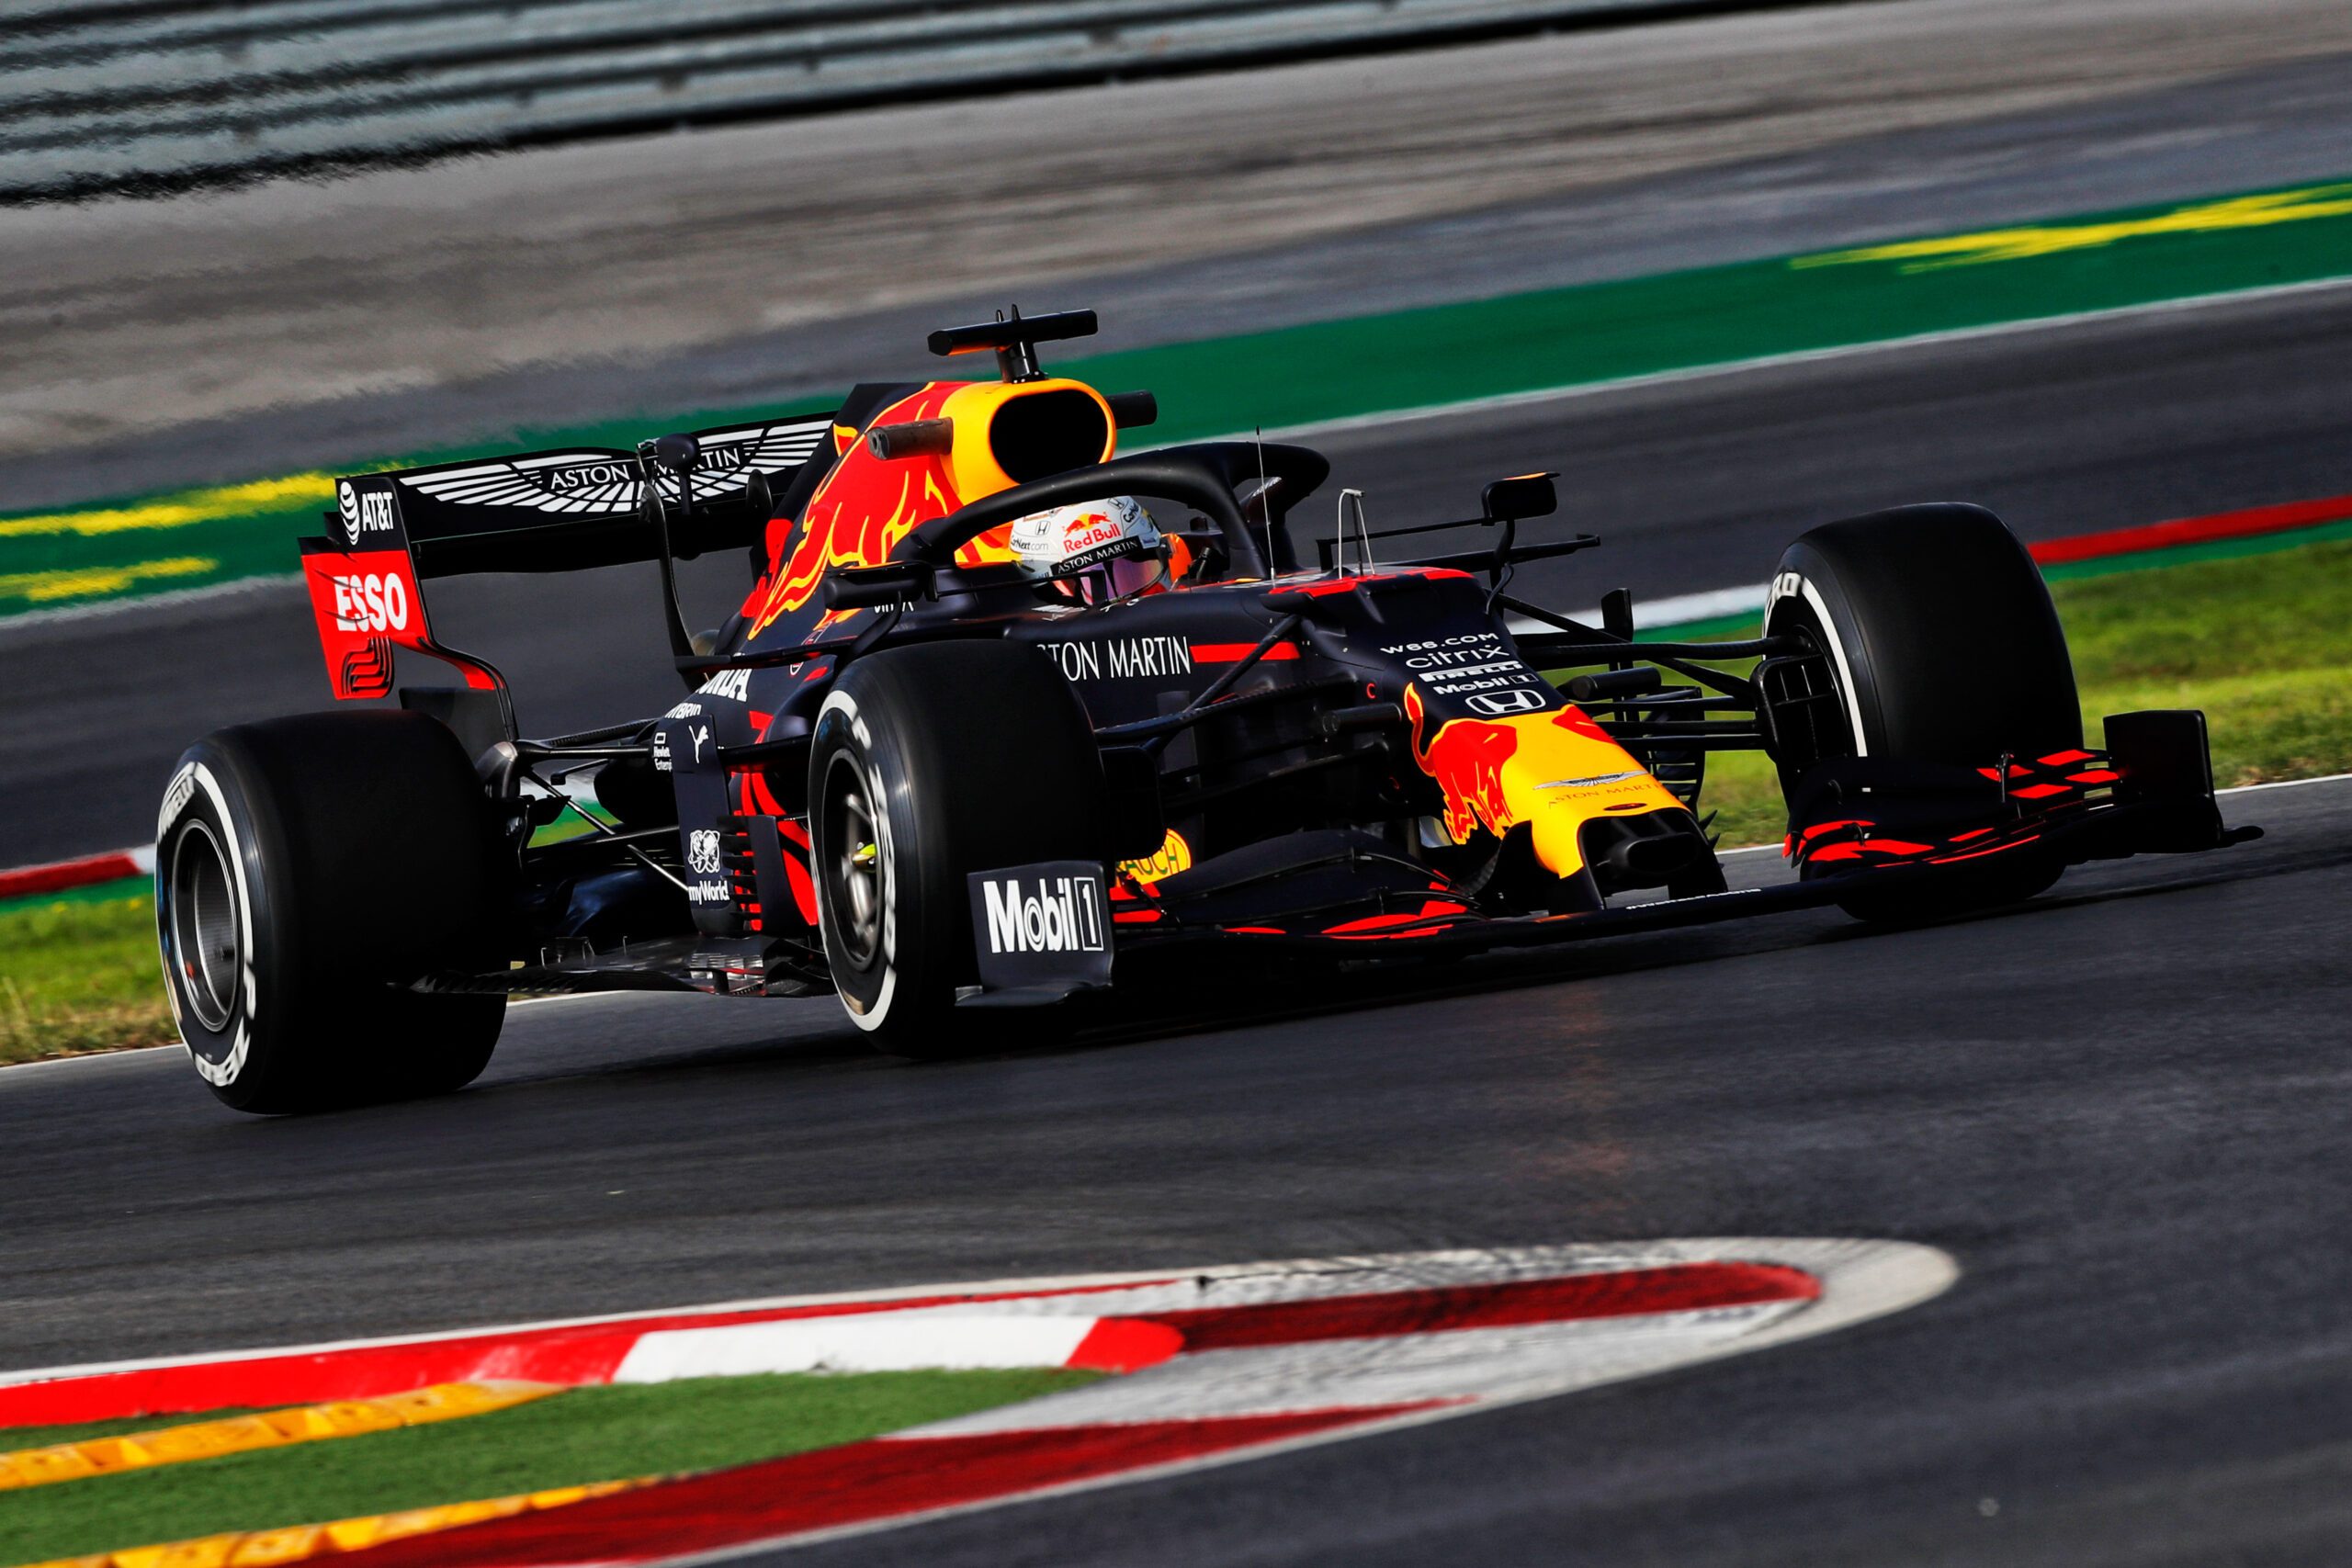 ISTANBUL,TURKEY,13.NOV.20 - MOTORSPORTS, FORMULA 1 - Grand Prix of Turkey, Istanbul Park, free practice. Image shows Max Verstappen (NED/ Red Bull Racing). Photo: GEPA pictures/ XPB Images/ Staley